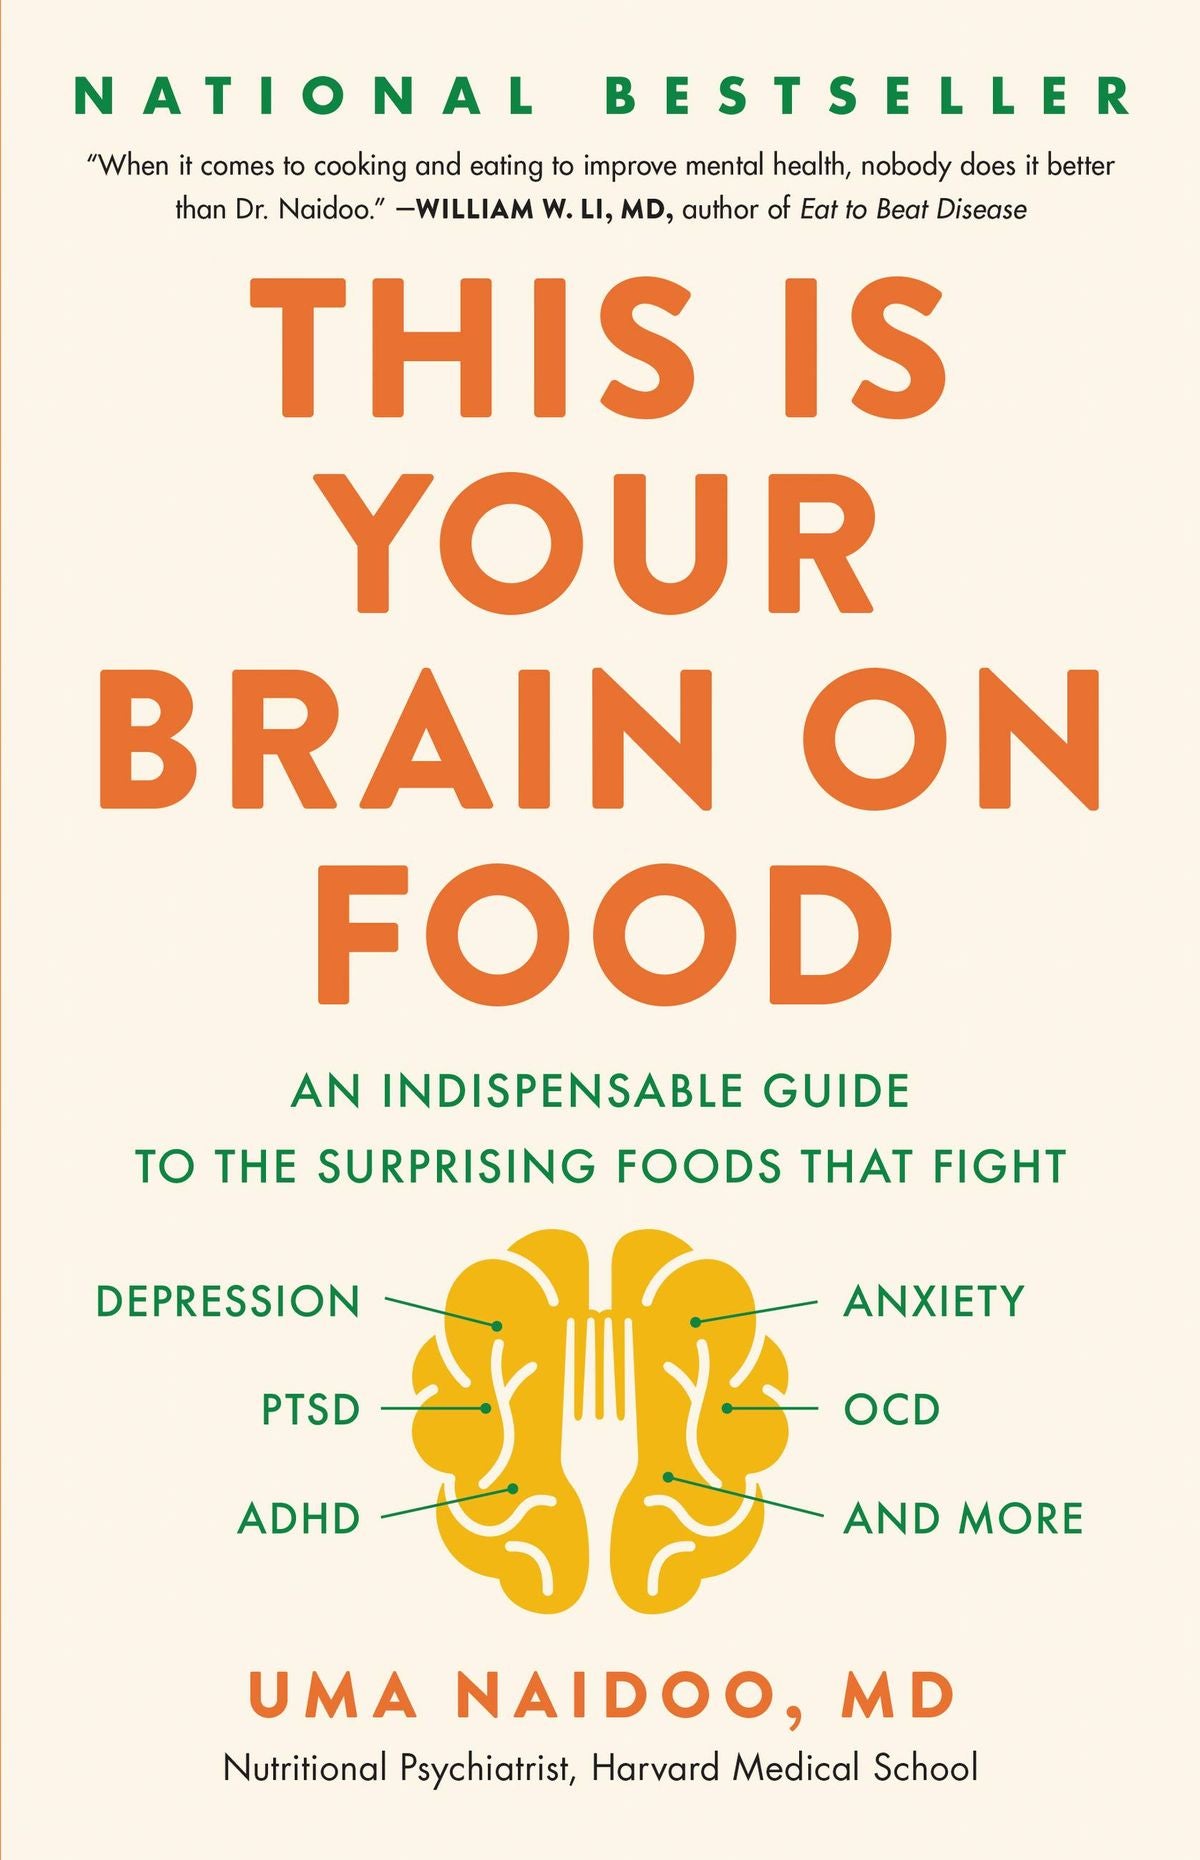 This Is Your Brain on Food by Uma Naidoo